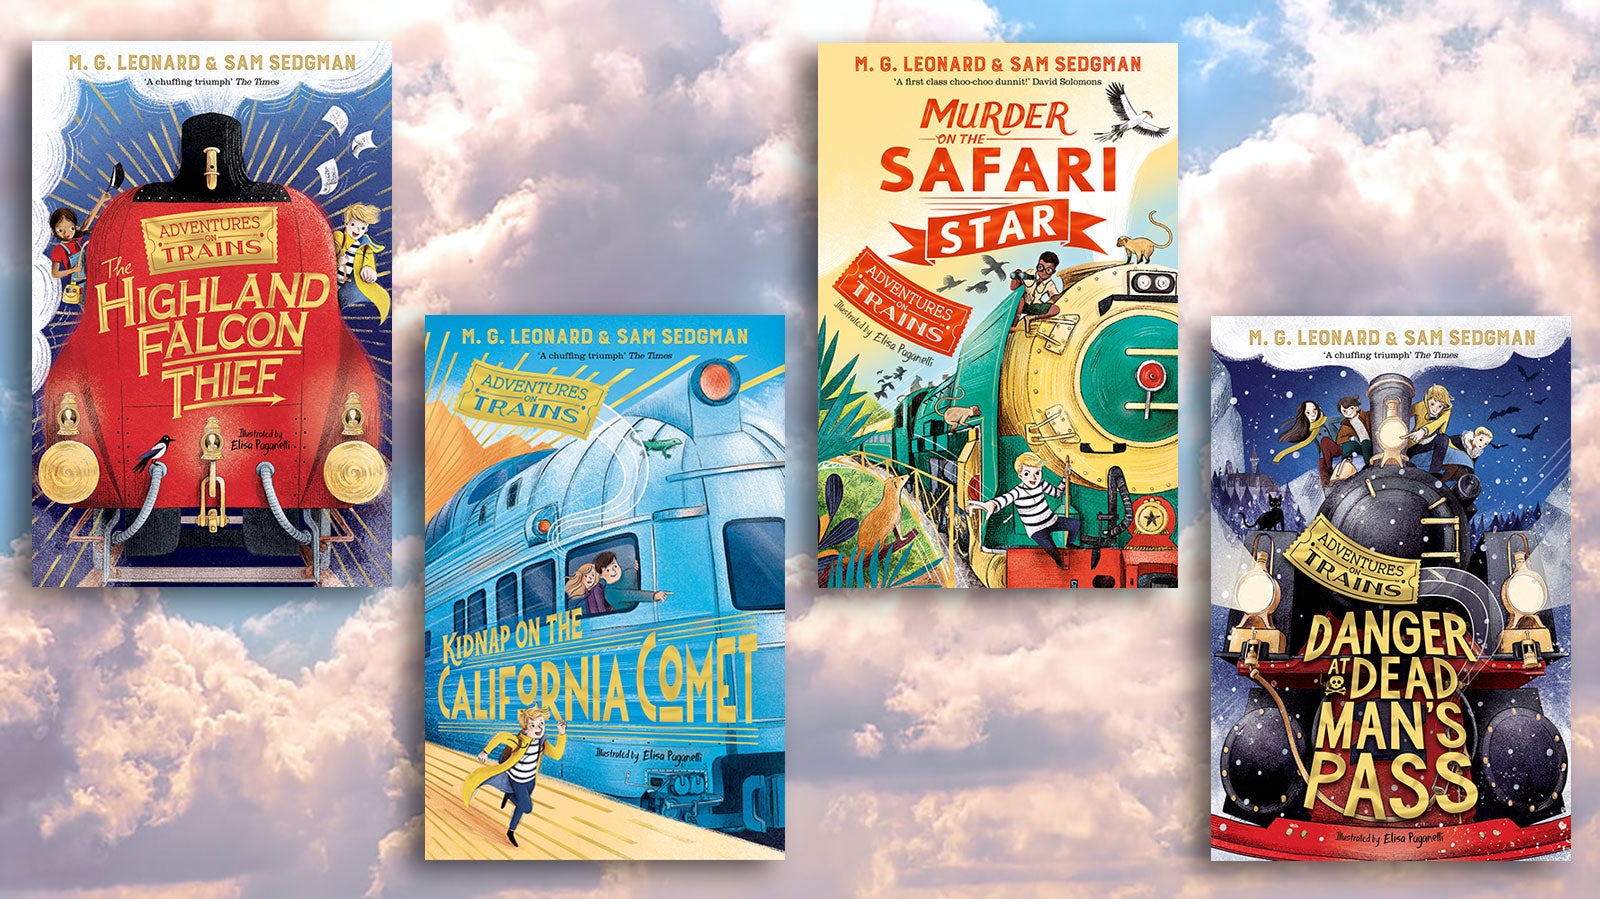 Books jackets for the four books in the Adventures on Trains series against the background of a cloudy blue sky